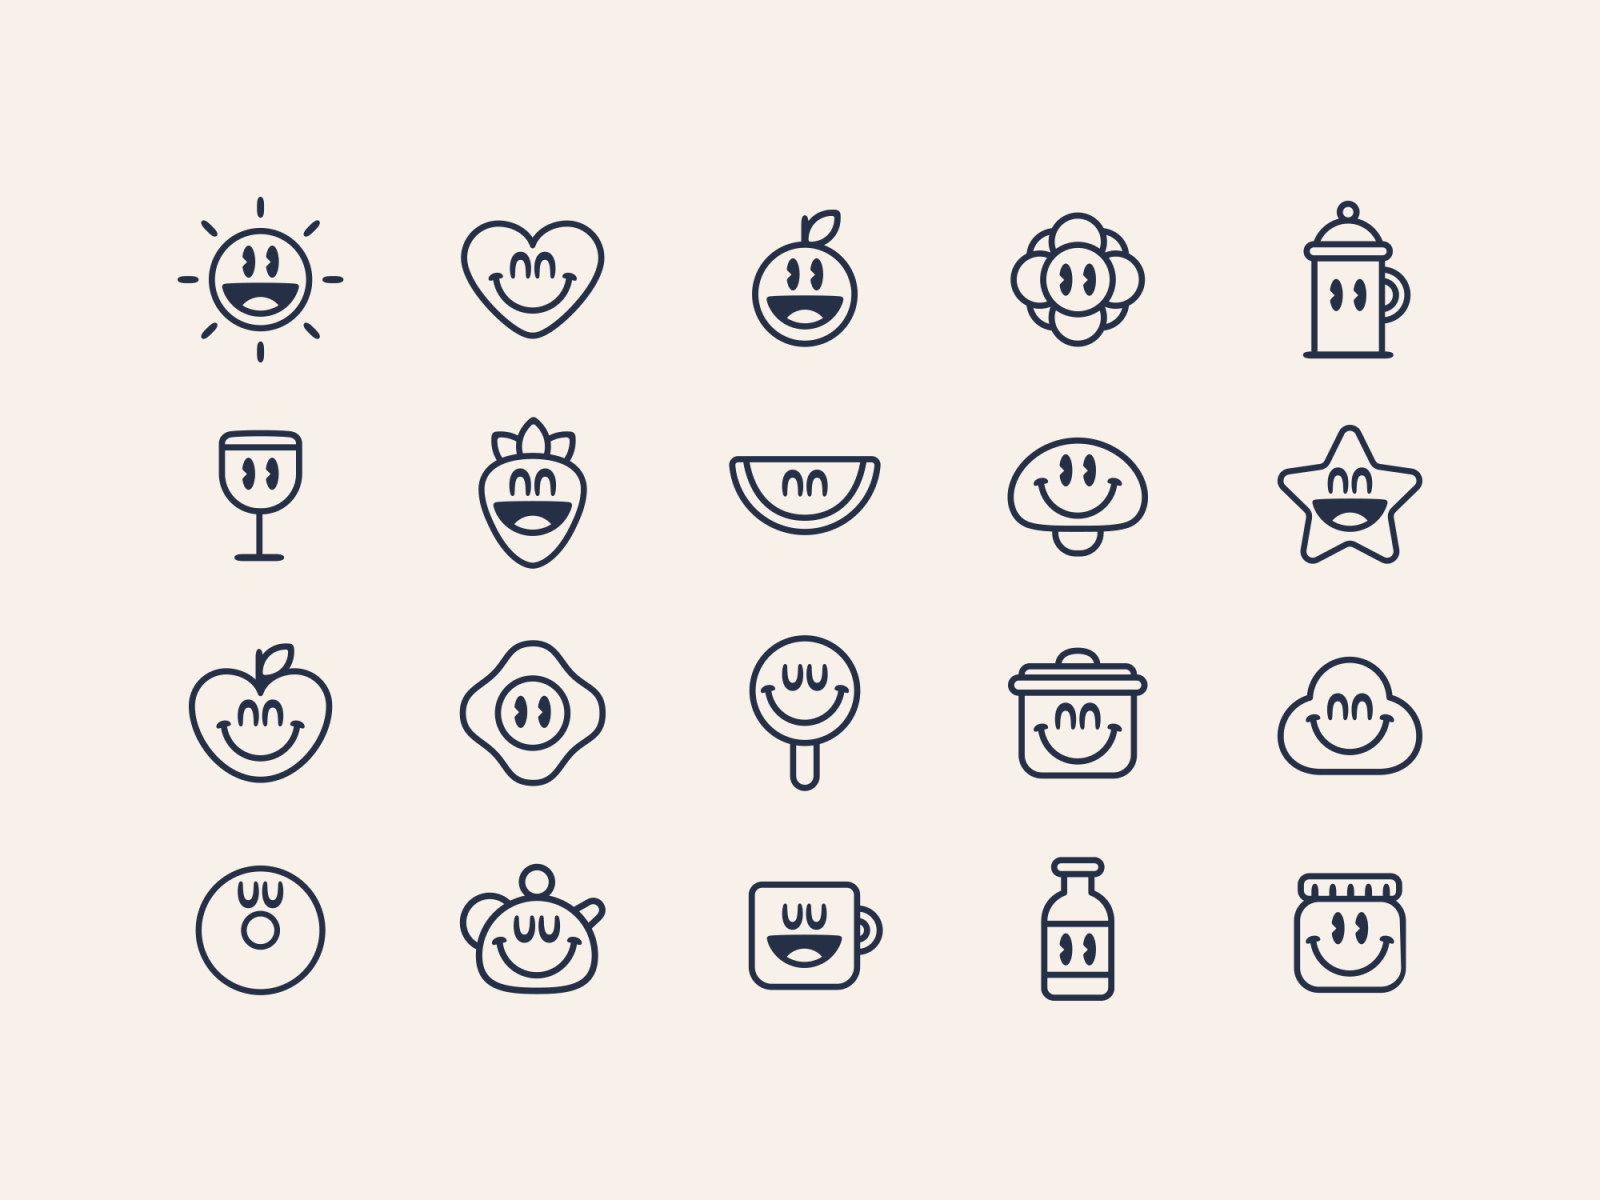 Pretty Green Icons by Thomas Fitzpatrick on Dribbble